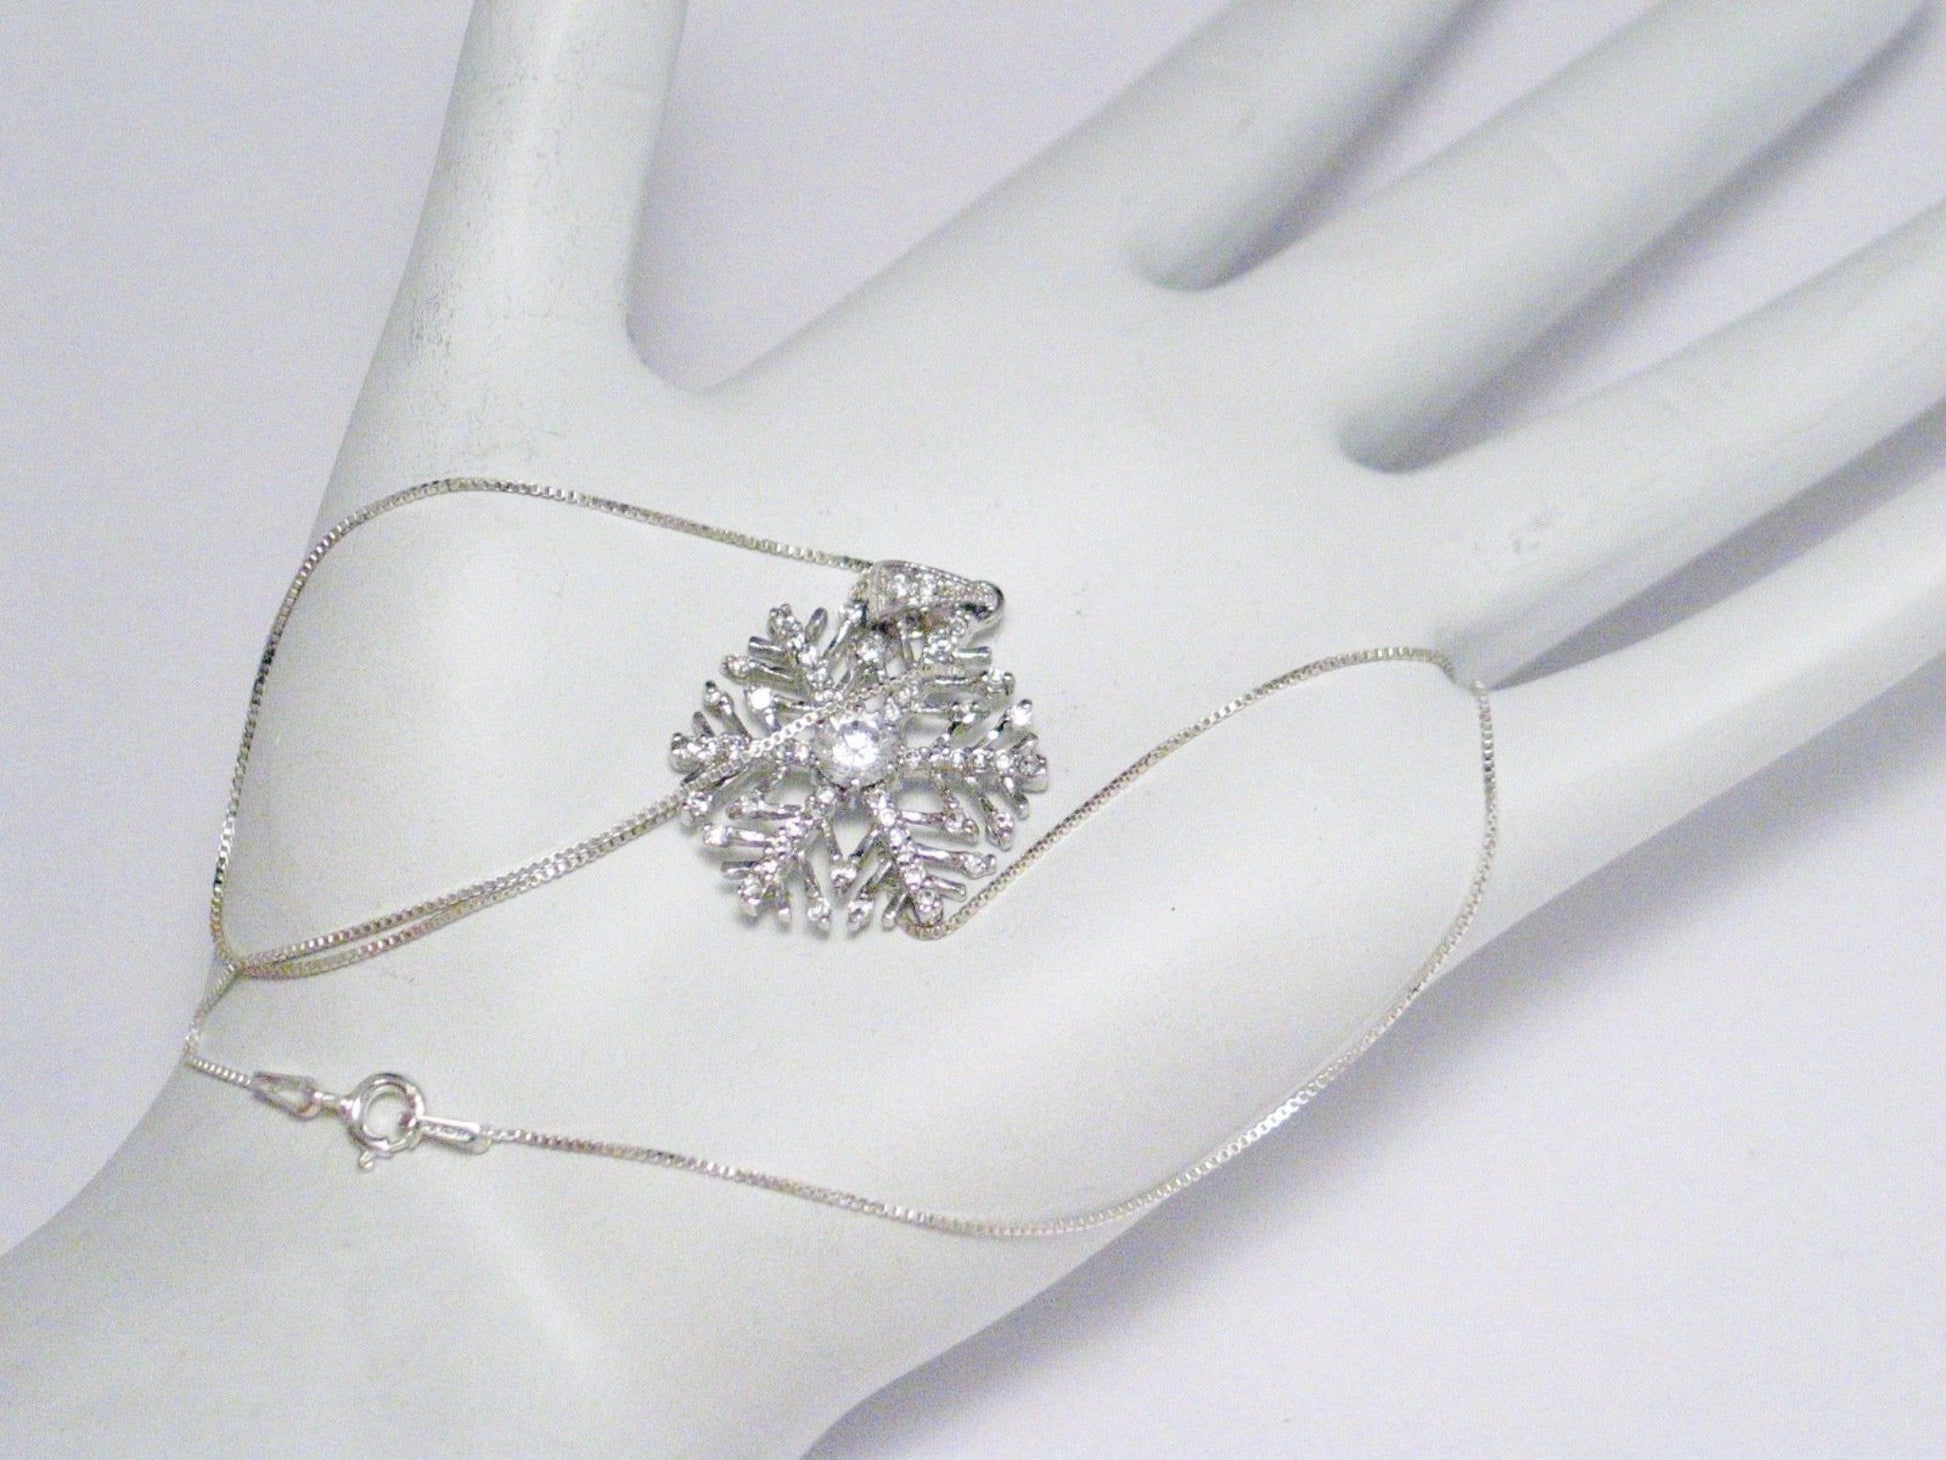 Sterling Silver Necklace, Sparkly Cubic Zirconia Snowflake Pendant + Box Chain Necklace Bundle